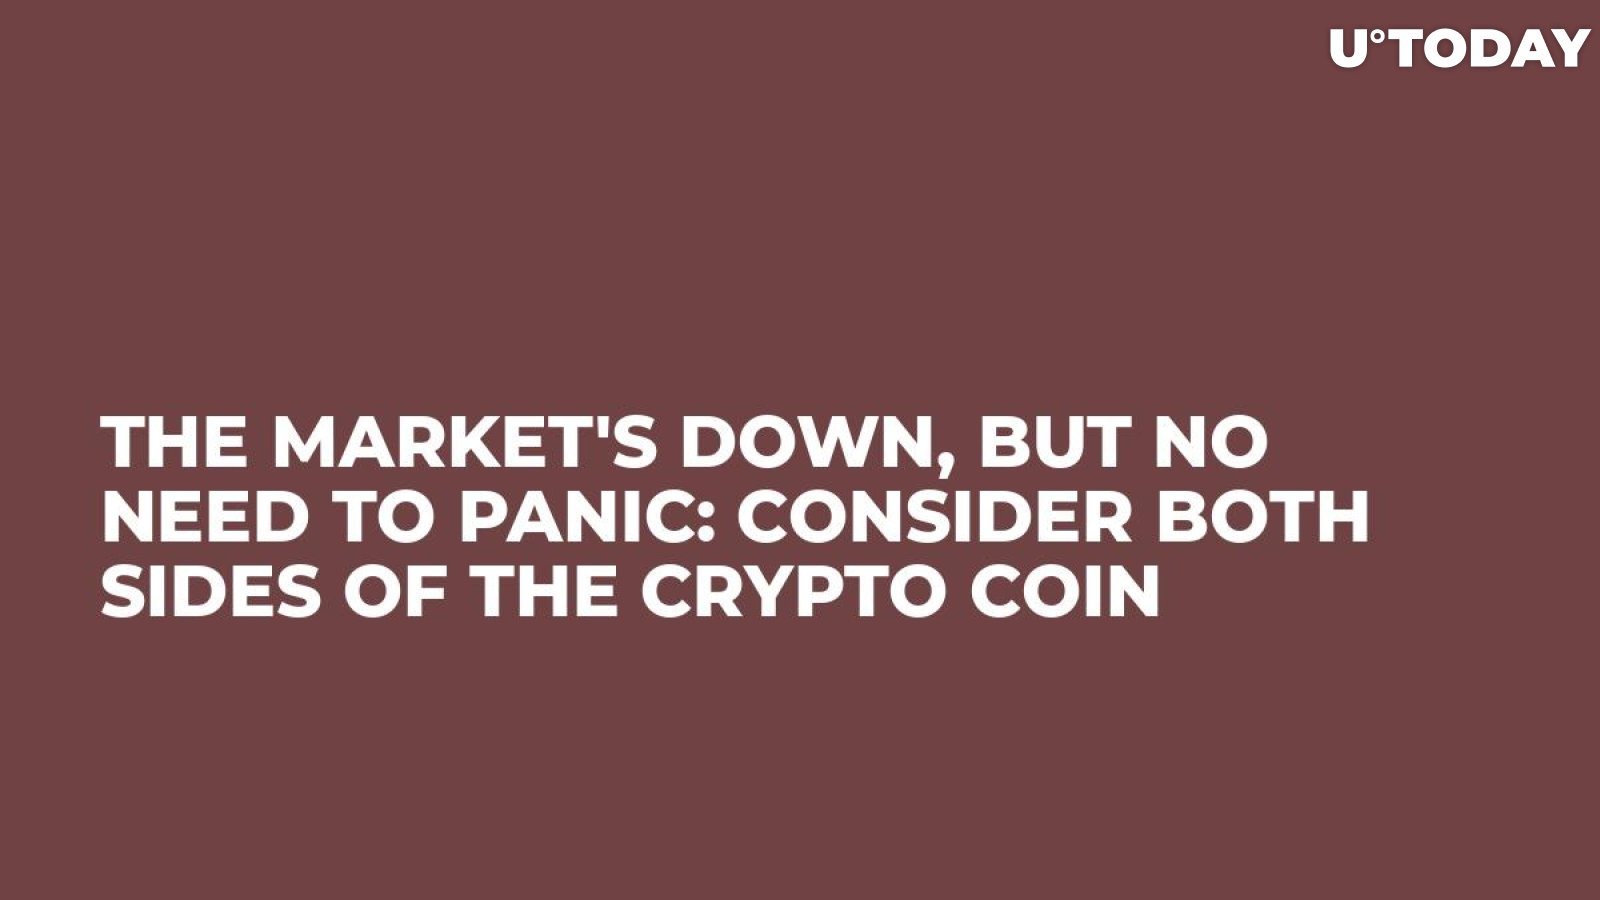 The Market's Down, but No Need to Panic: Consider Both Sides of the Crypto Coin